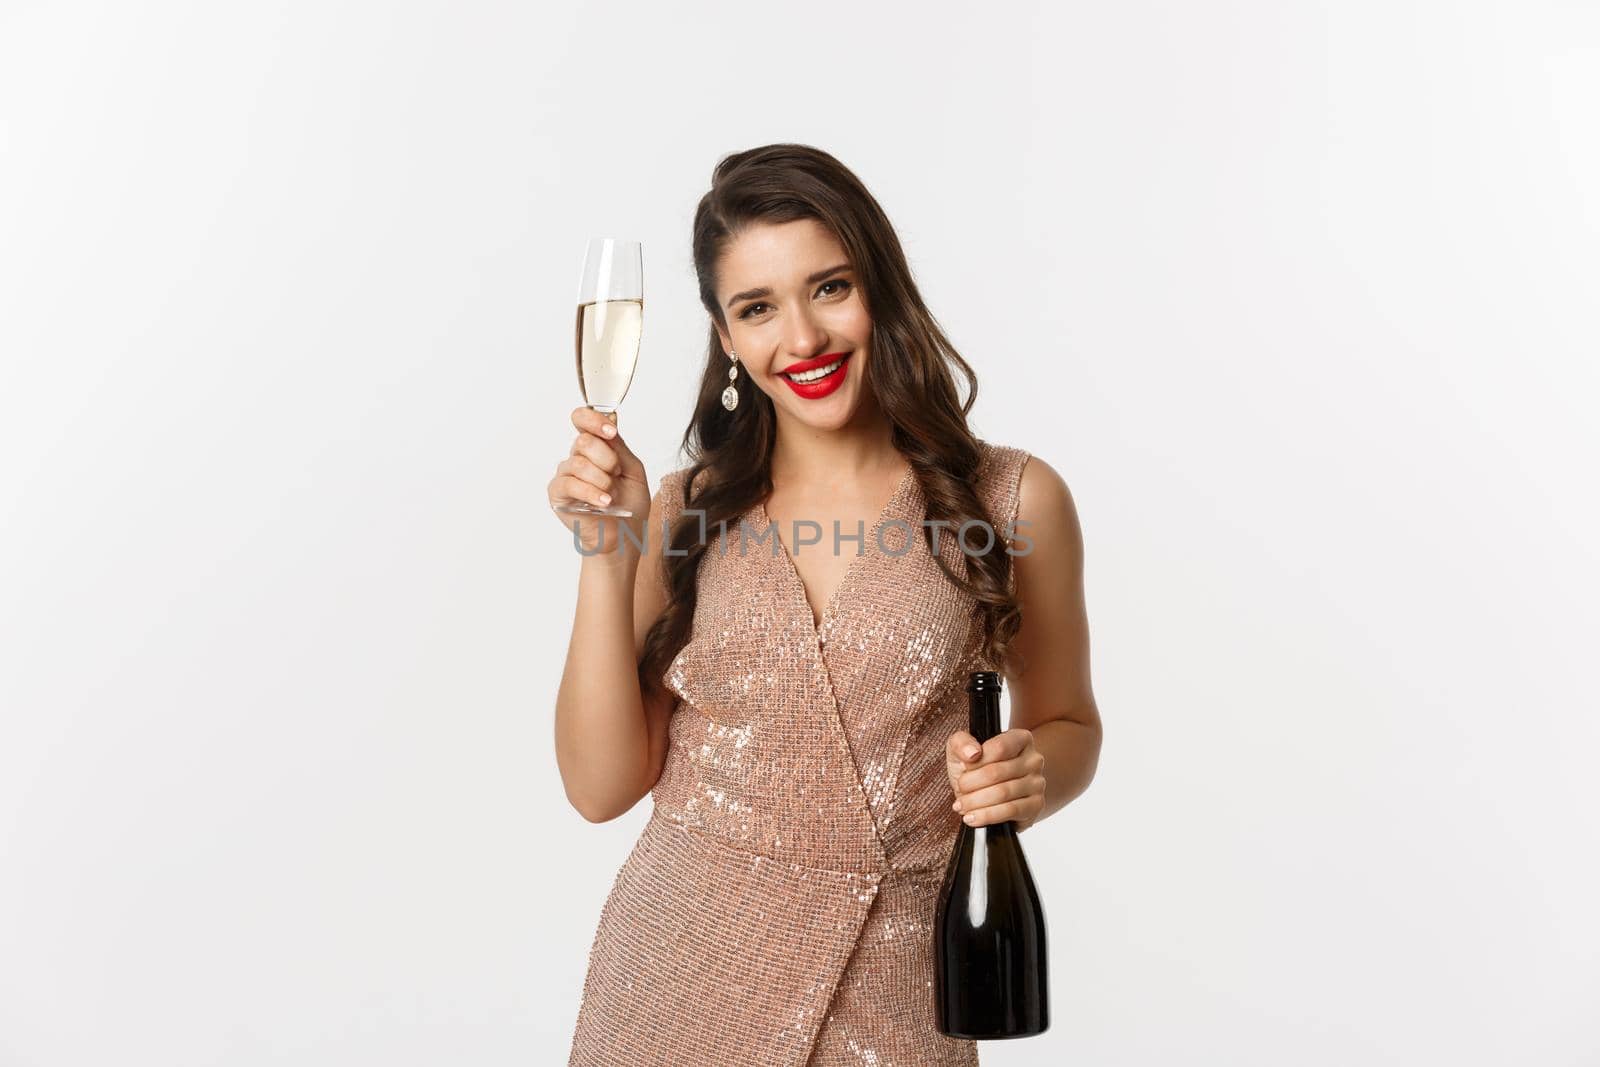 Winter holidays celebration concept. Happy woman on New Year party in luxury dress, drinking champagne and smiling, standing over white background.